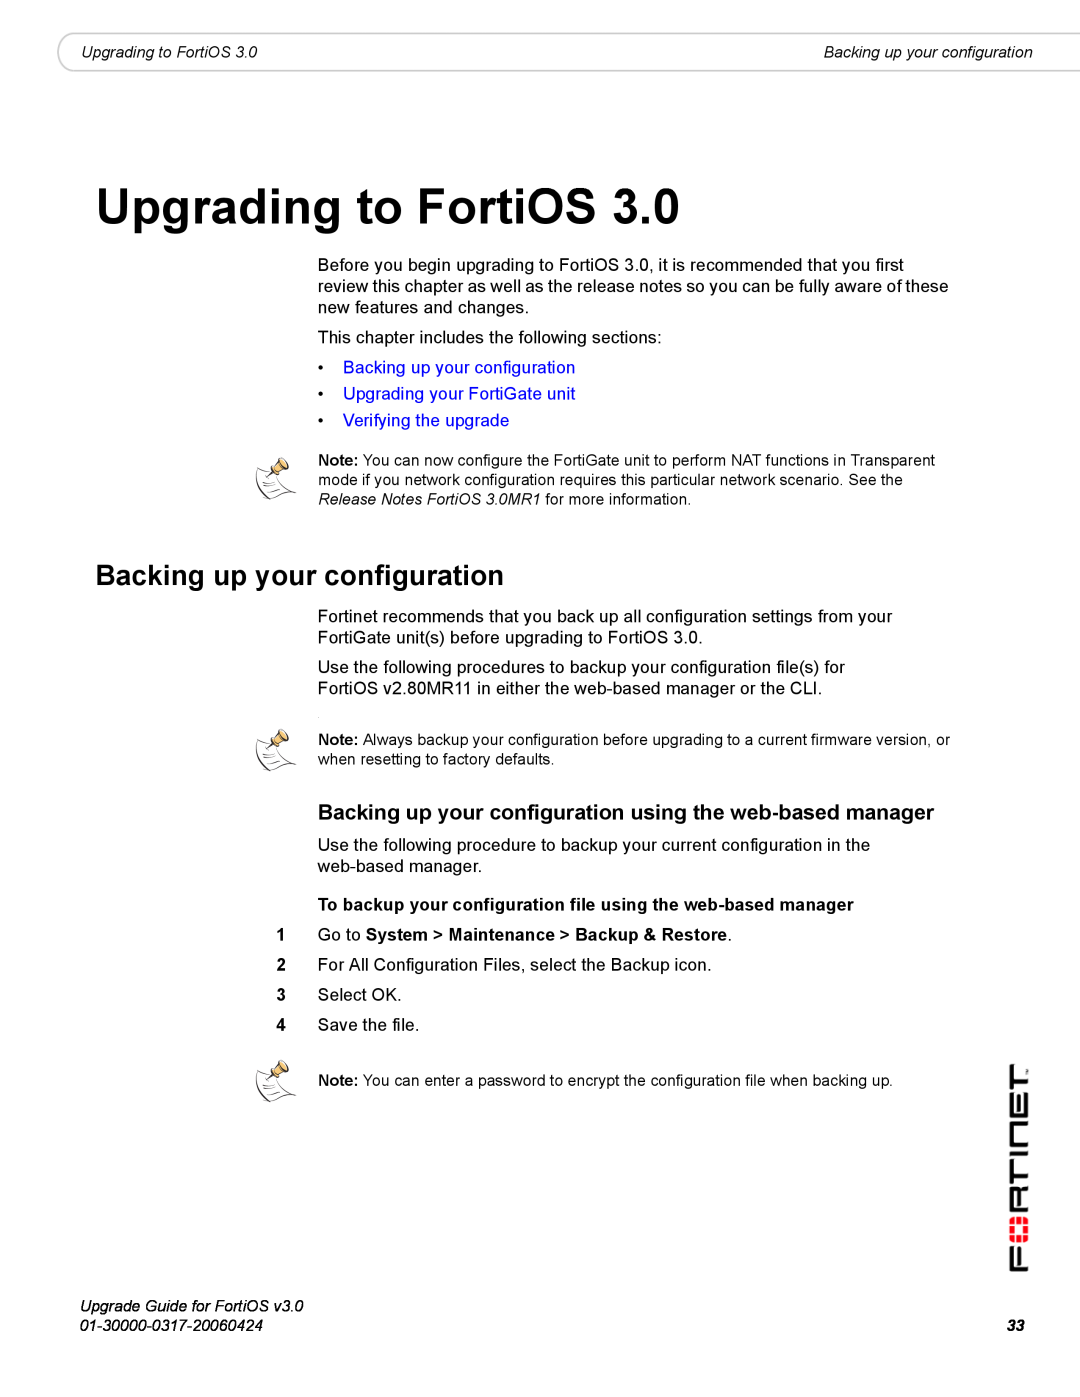 Fortinet FortiOS 3.0 manual Upgrading to FortiOS, Backing up your configuration, Verifying the upgrade 